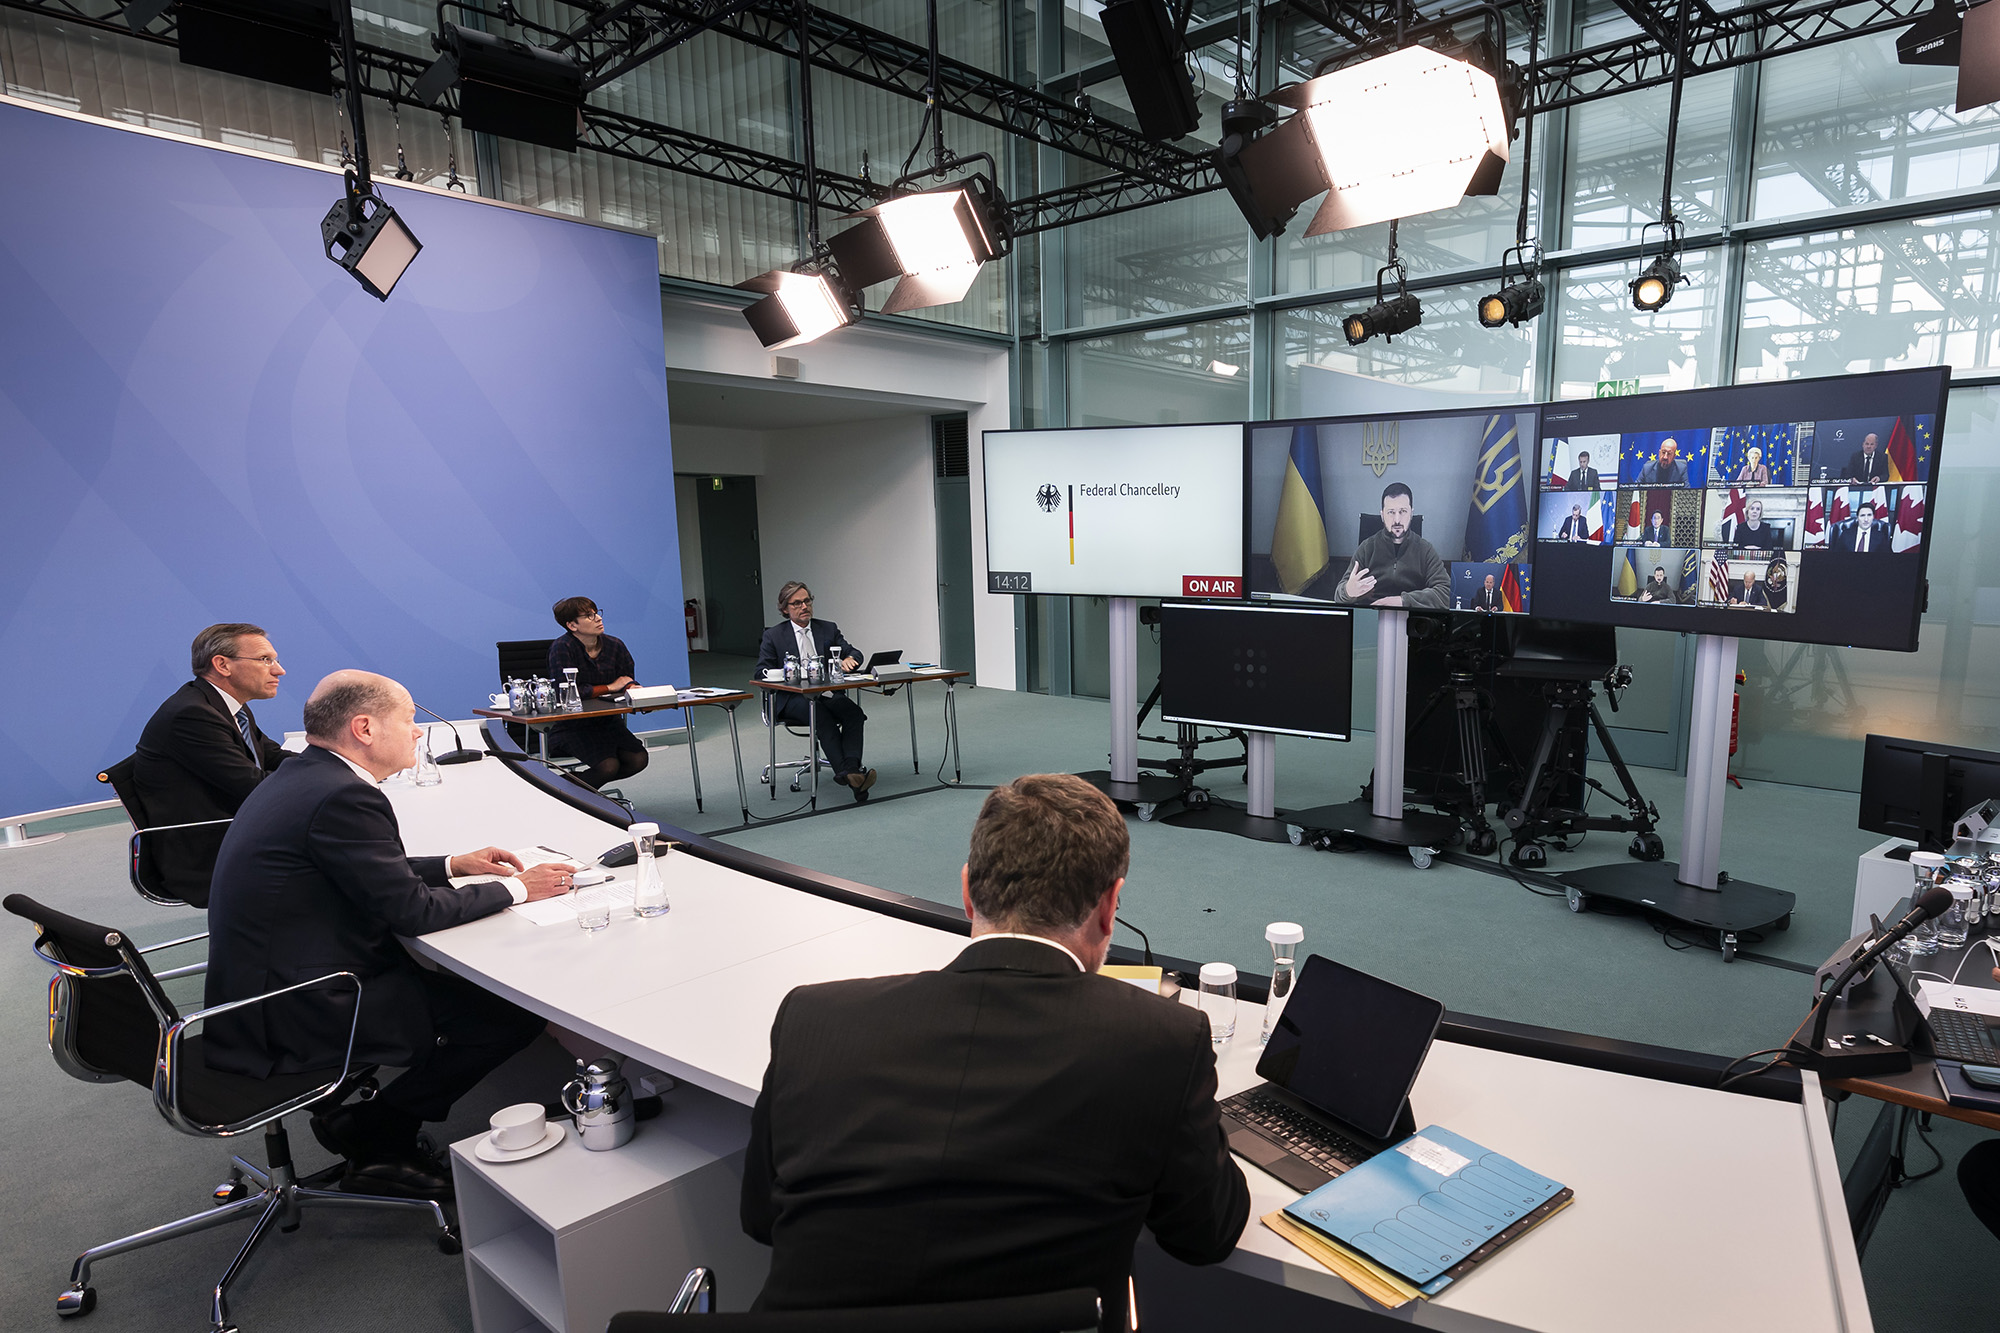 German Chancellor Olaf Scholz takes part in a video conference with Ukrainian President Volodymyr Zelensky and the head of states of the G7 on October 11, n Berlin, Germany.